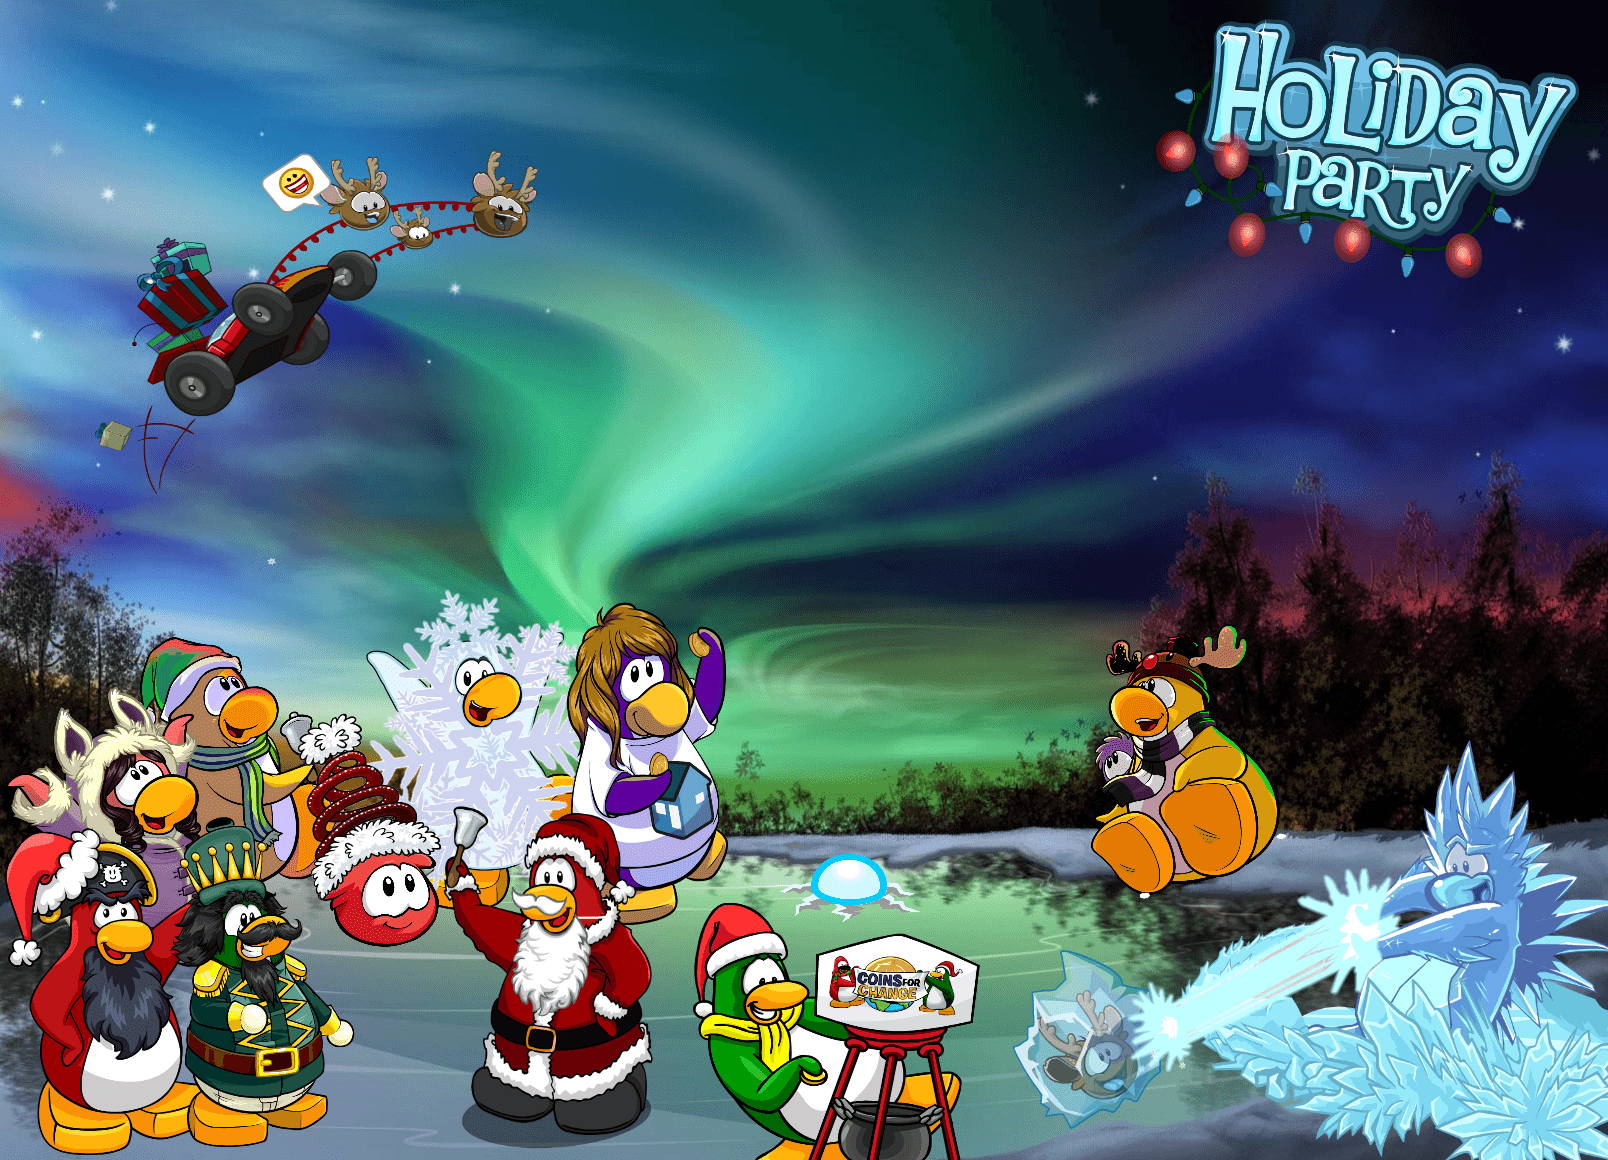 Holiday Party Wallpaper.png